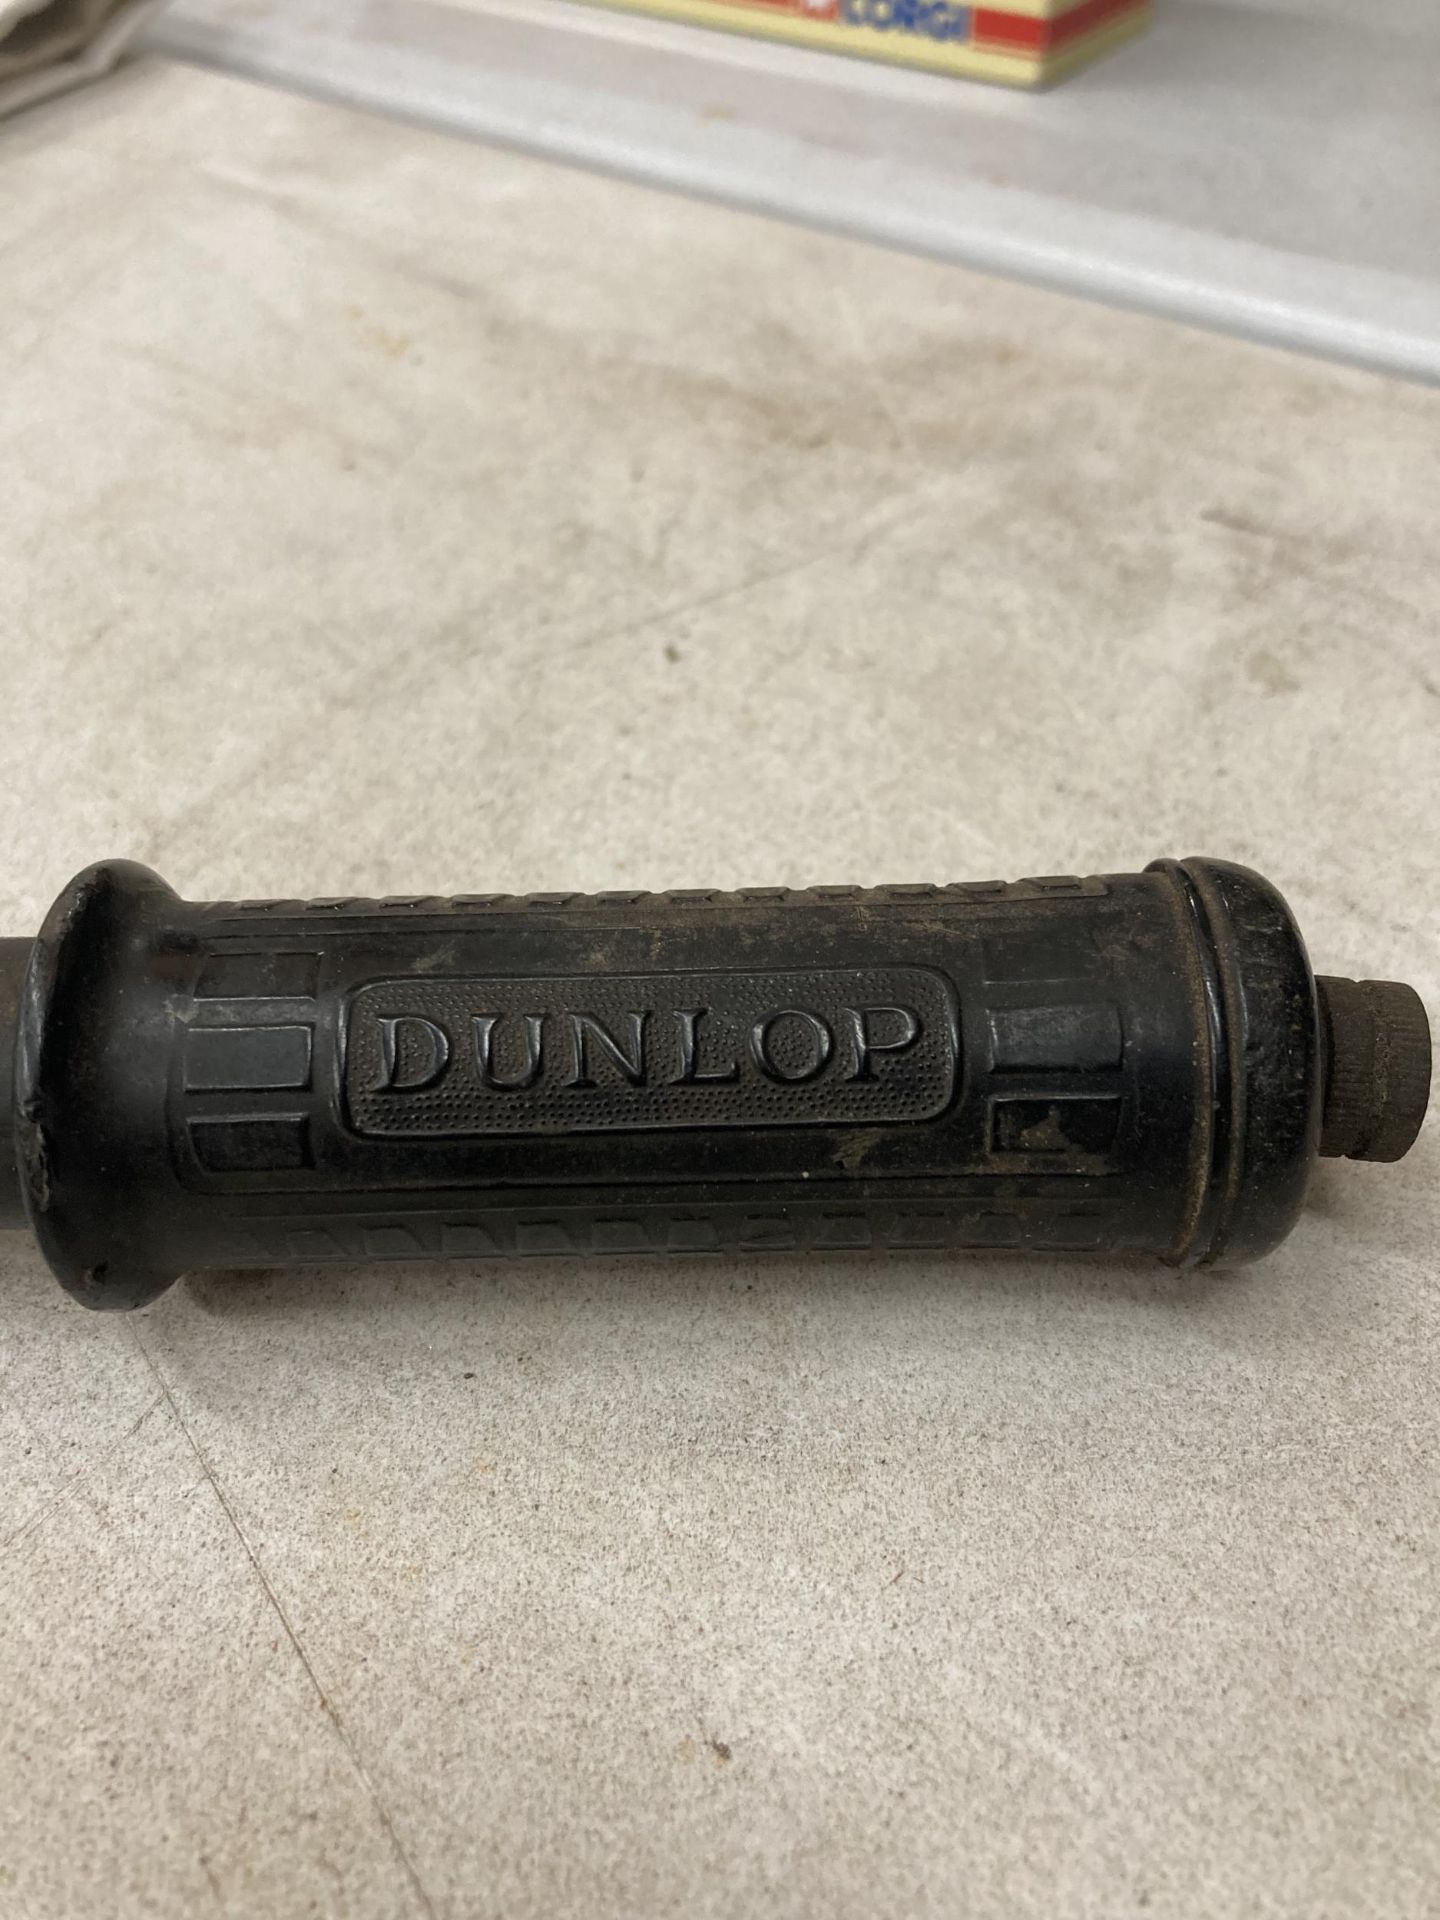 A VINTAGE DUNLOP BICYCLE PUMP STAMPED: VICTORIA BICYCLE DEPOT 34, STOCKPORT ROAD, ASHTON- UNDER- - Image 2 of 3